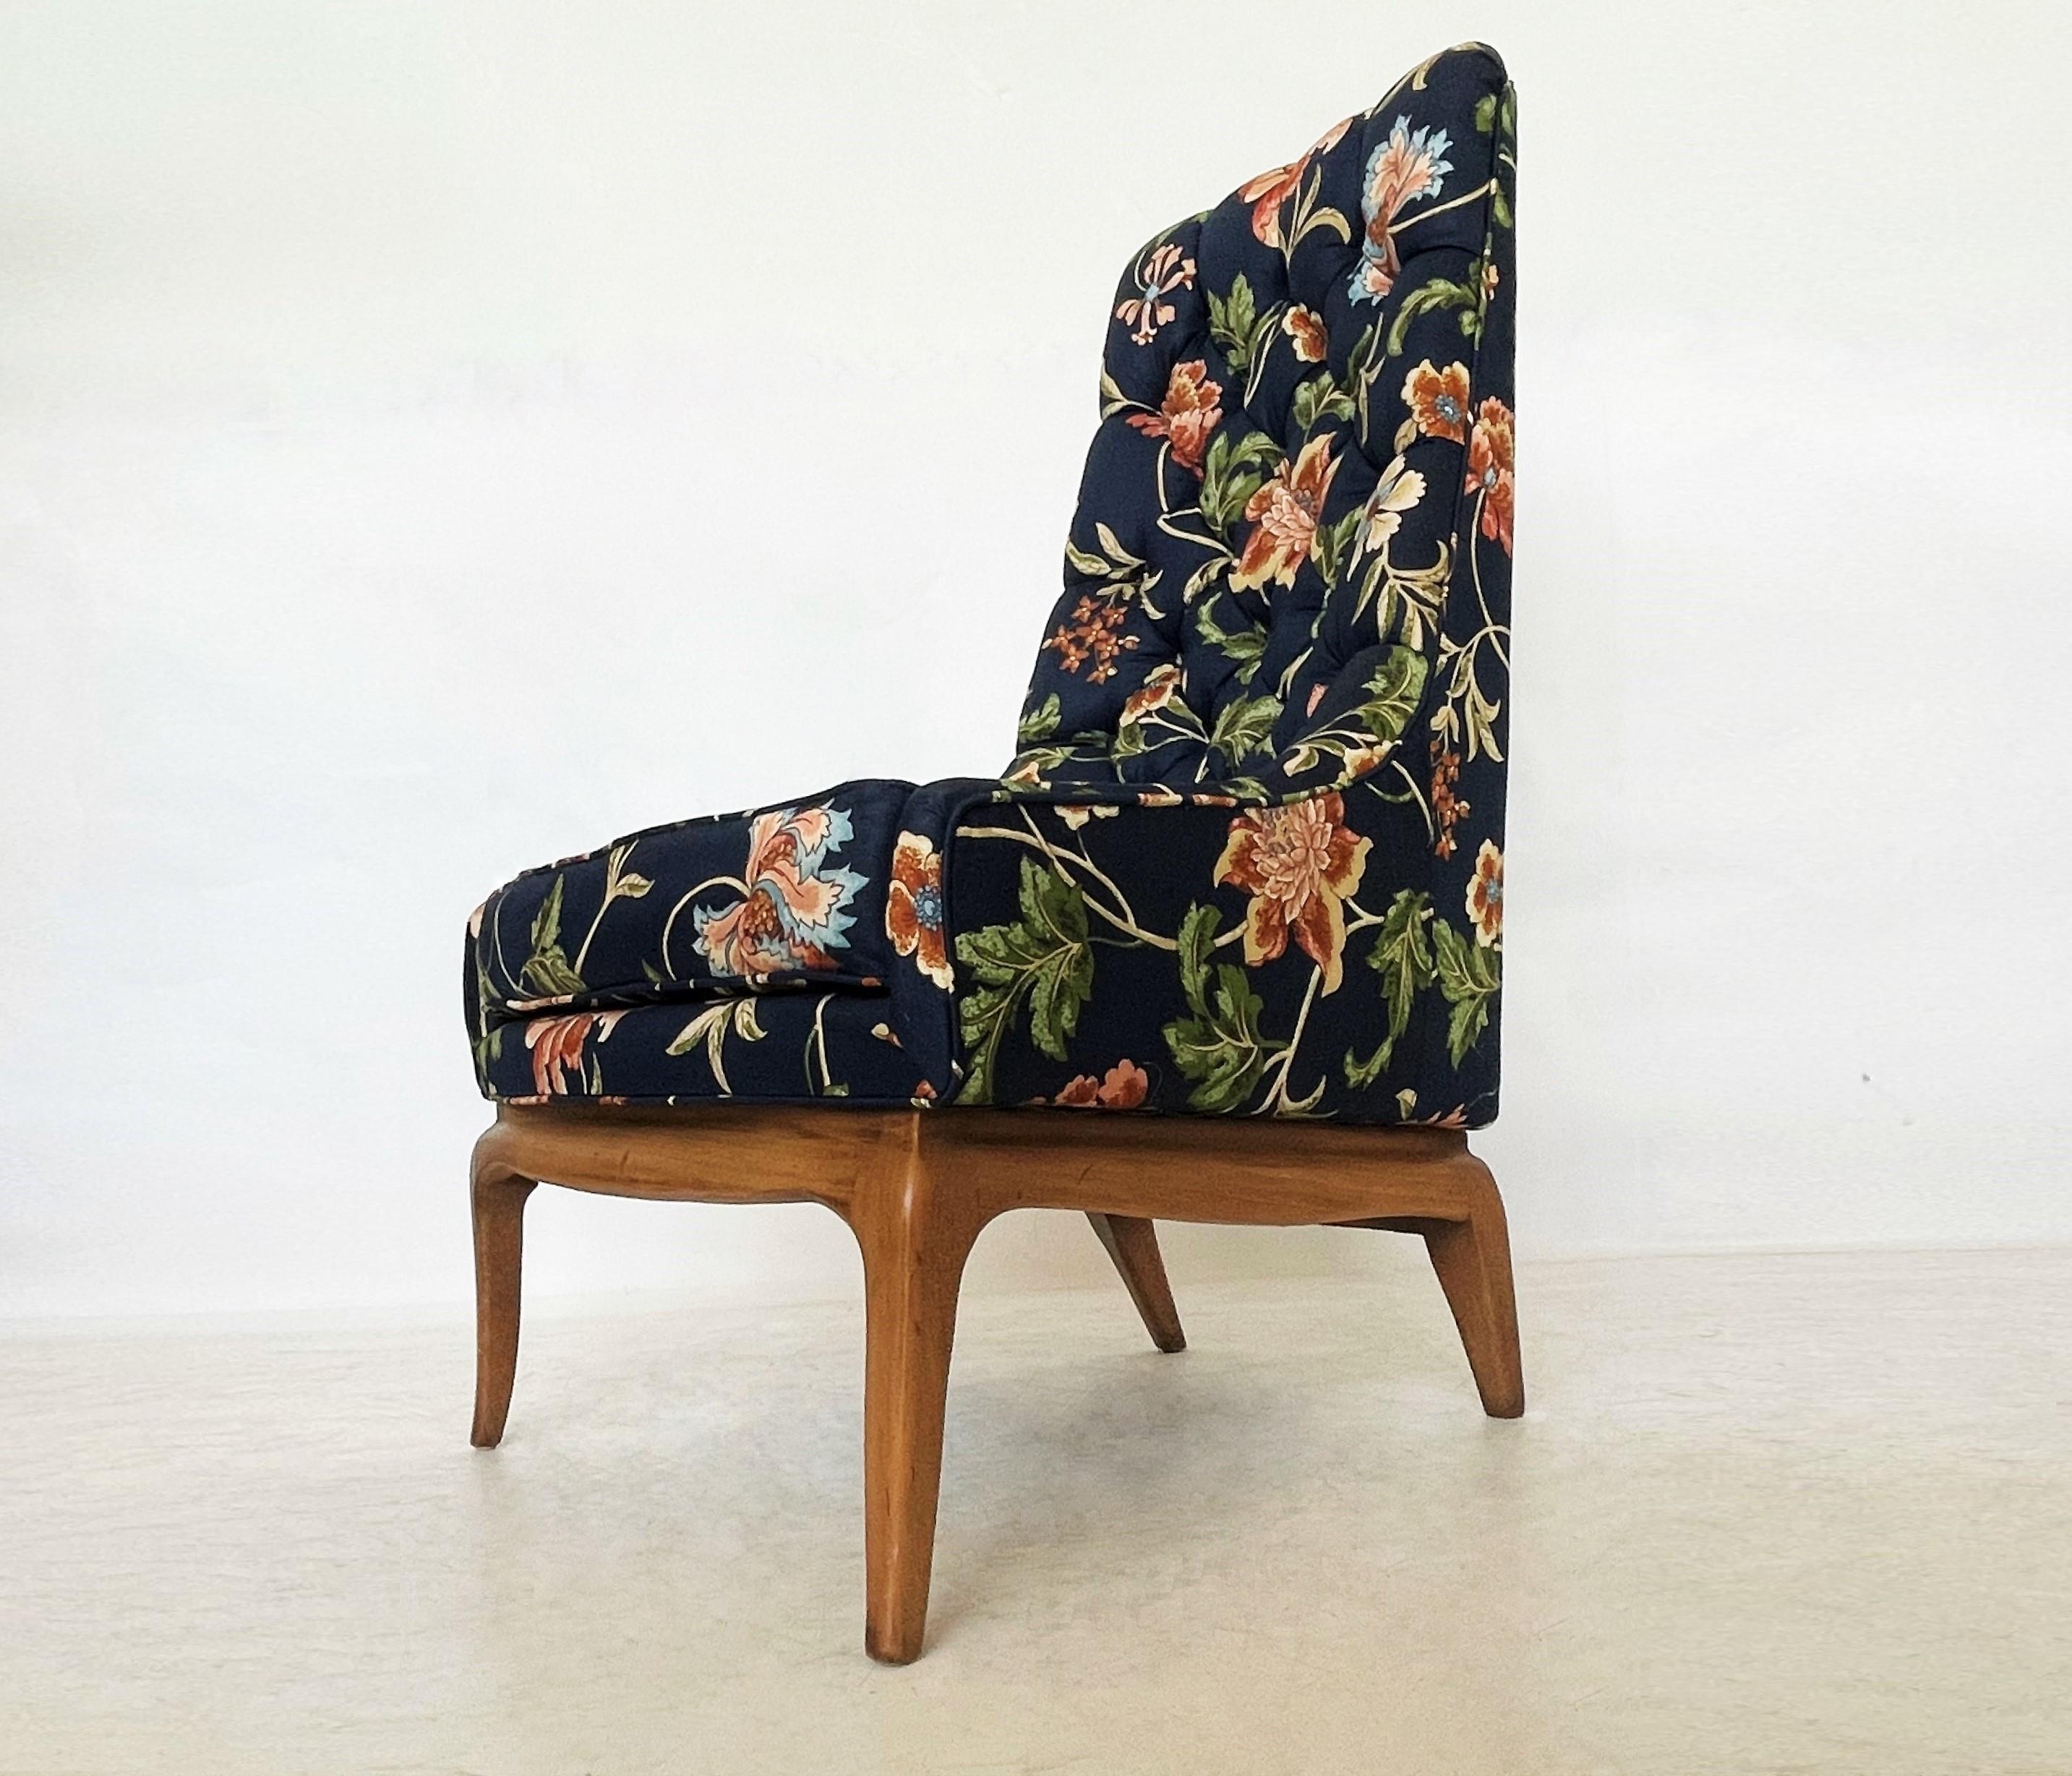 Displaying lovely lines with the high backs high and offering great versatility. This use of material in combination with the curved frame refers strongly to be Robsjohn-Gibbings designed. Featuring tufted high backs in original floral upholstery